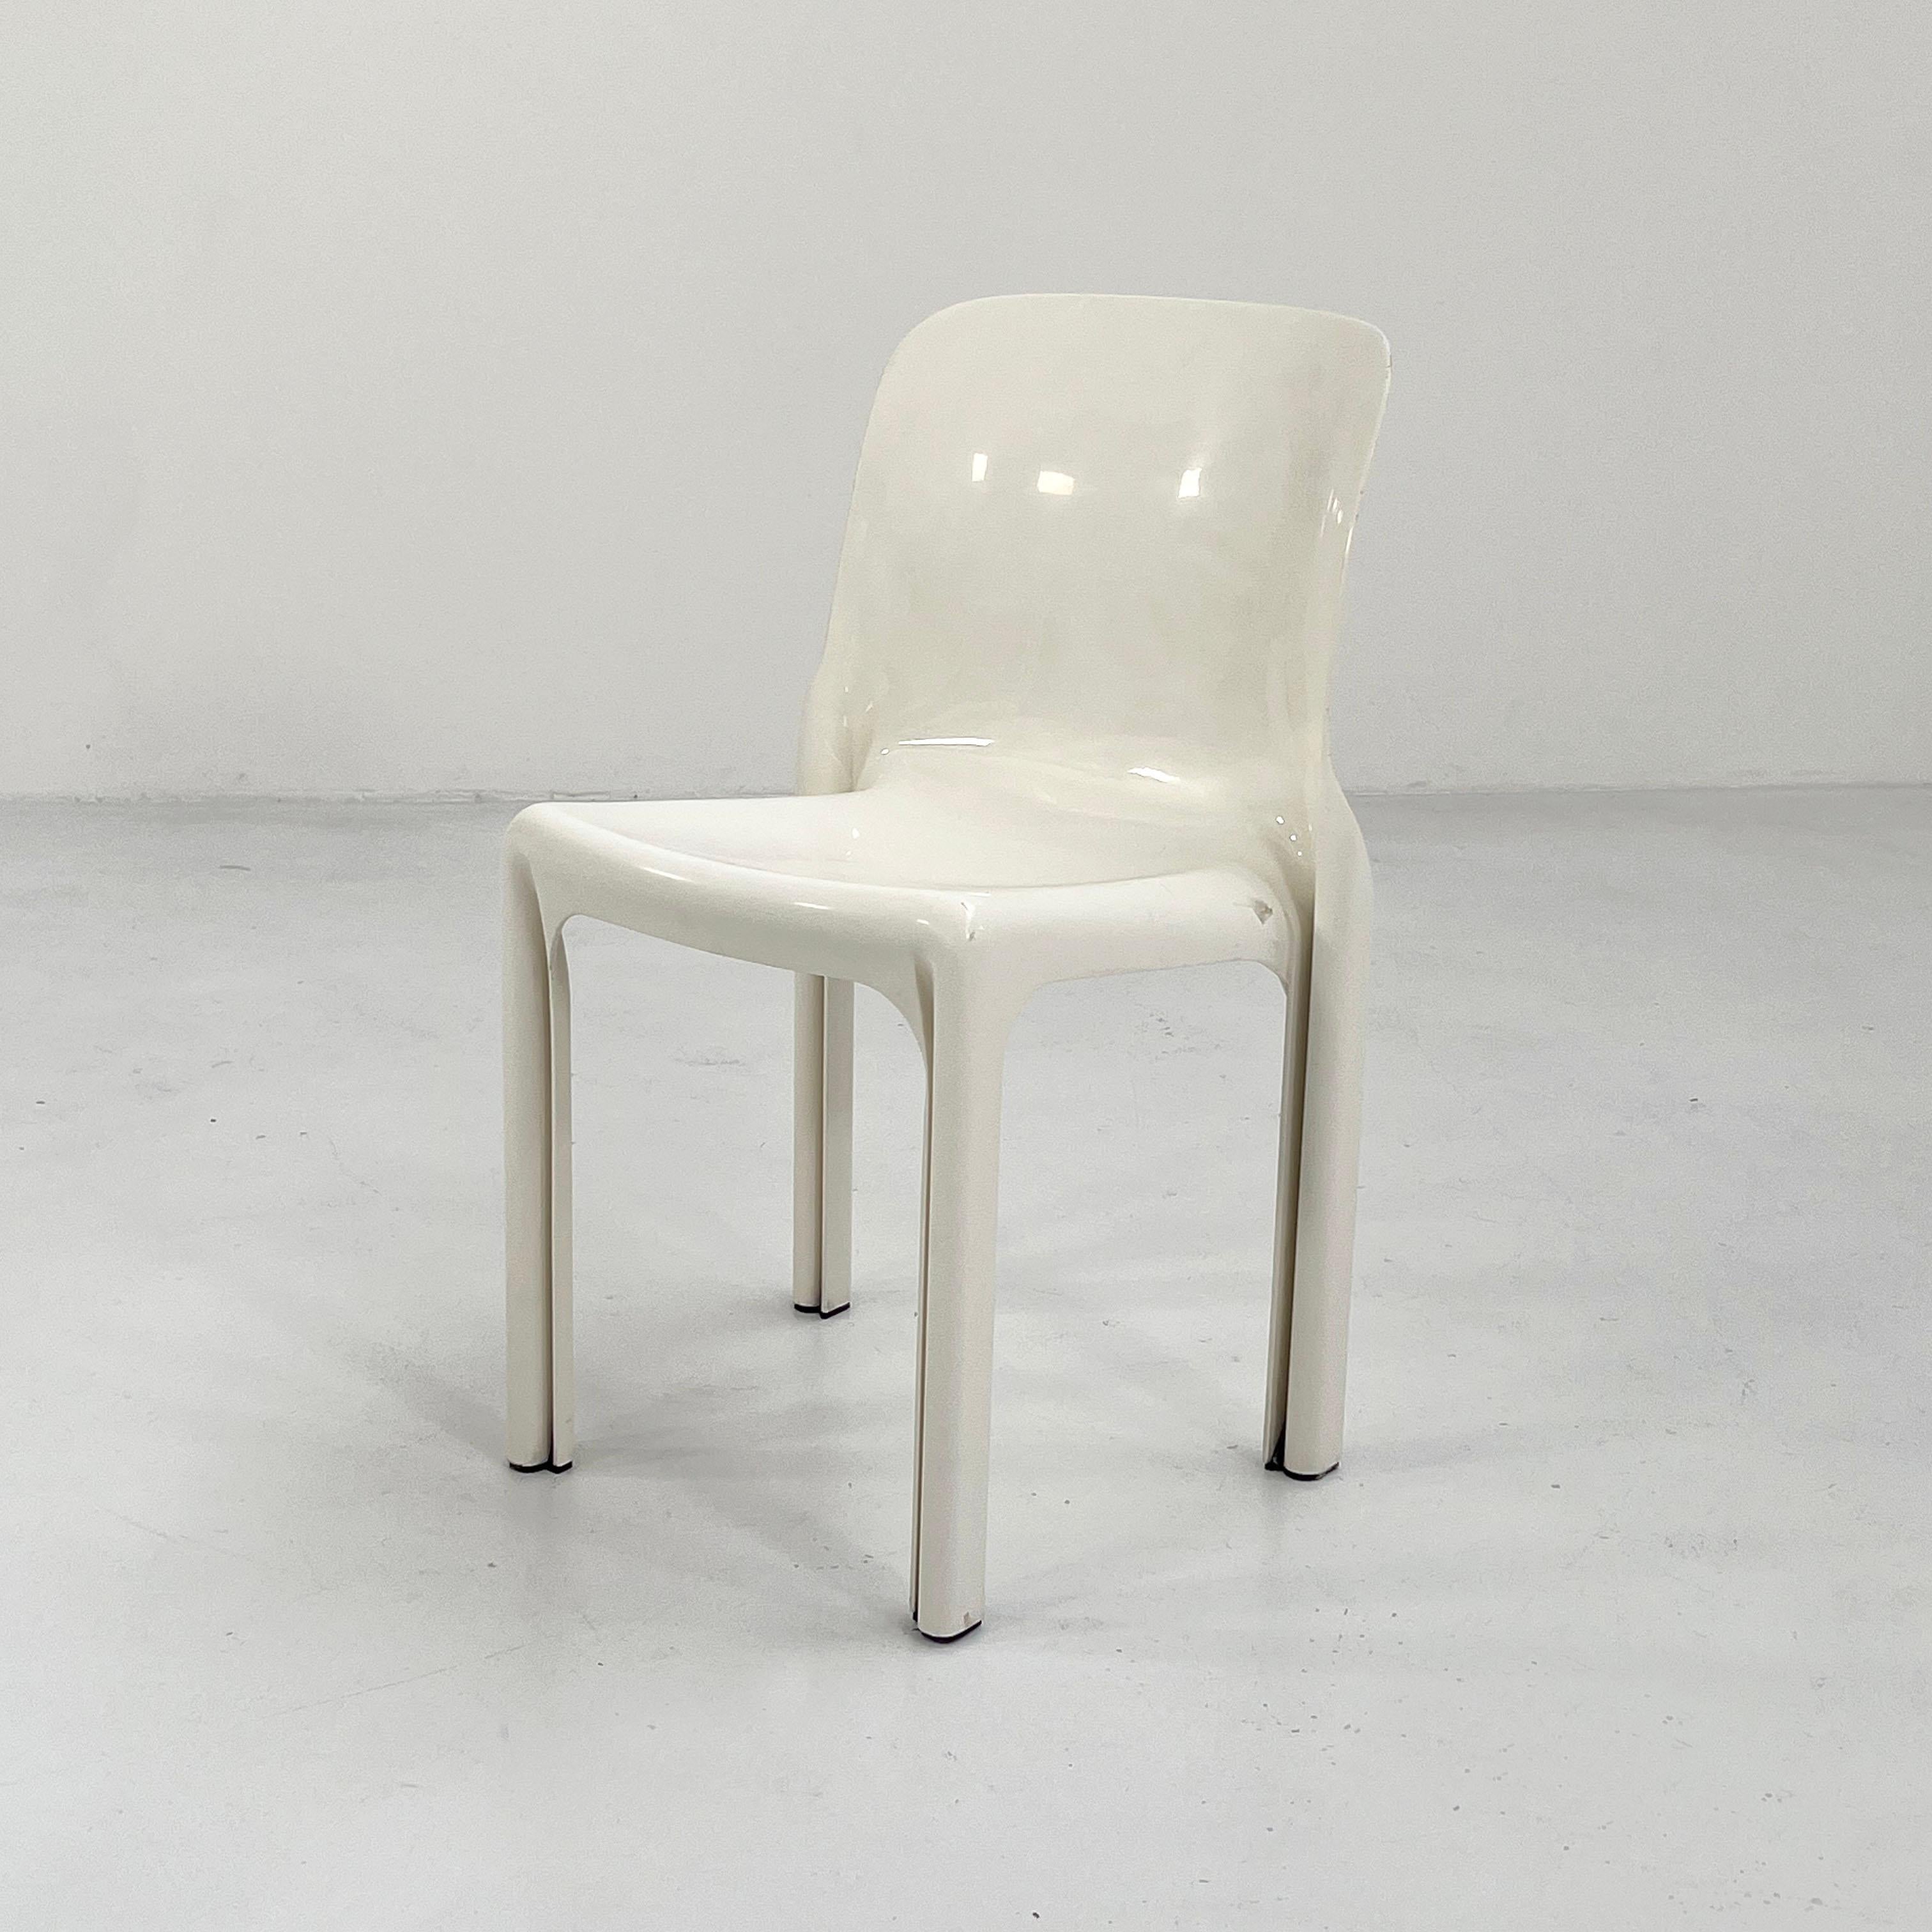 Designer - Vico Magistretti
Producer - Artemide
Model - Selene Chair
Design Period - Seventies
Measurements - Width 47 cm x Depth 50 cm x Height 76 cm x Seat Height 48 cm
Materials - Plastic
Color - White
Light wear consistent with age and use. Some